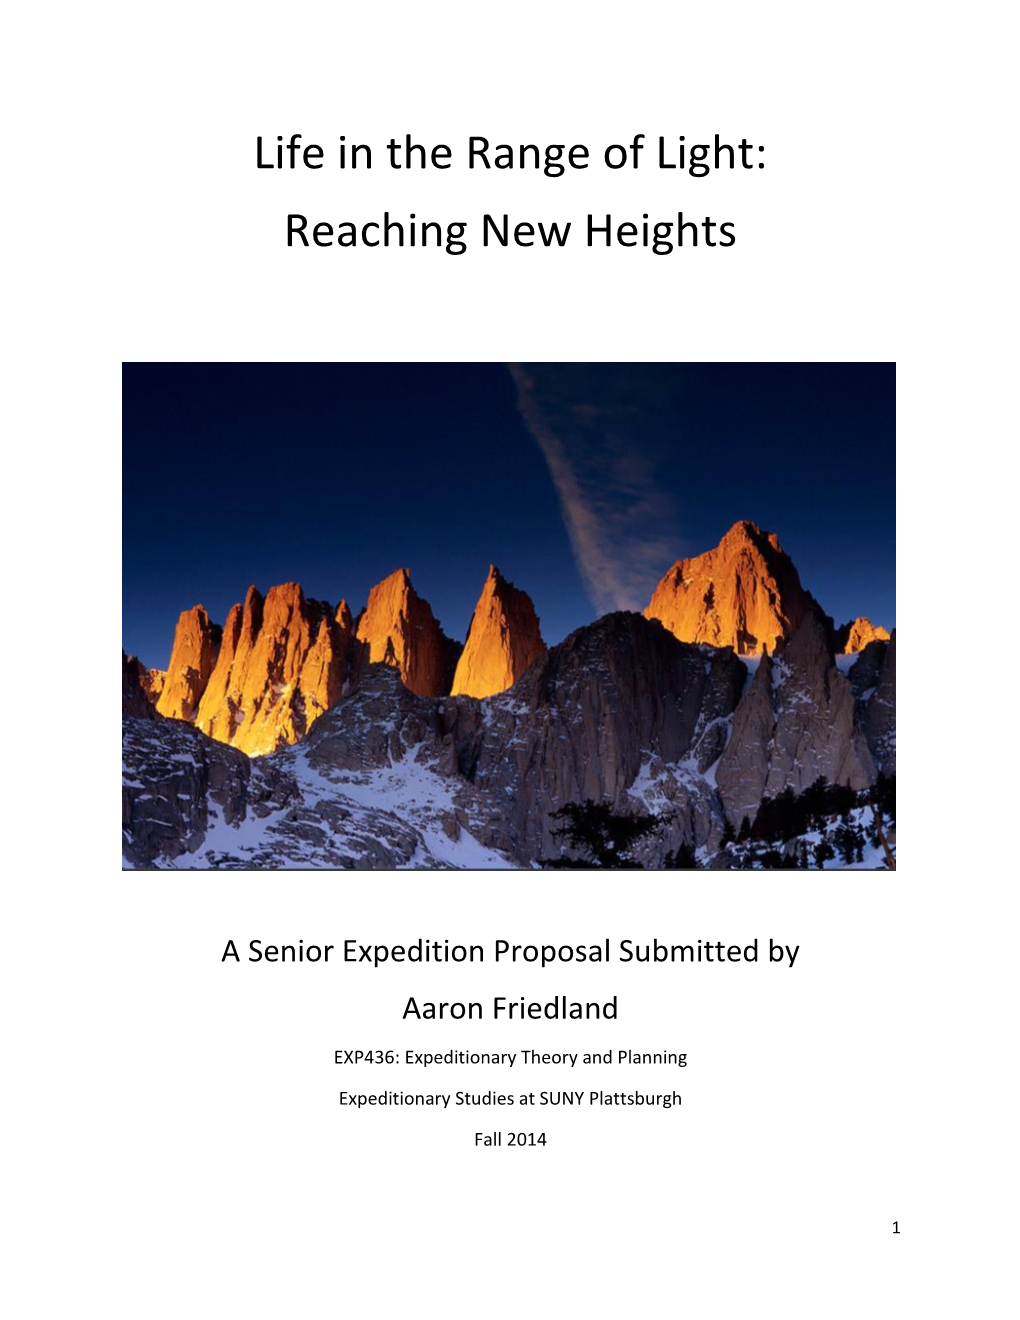 Life in the Range of Light: Reaching New Heights